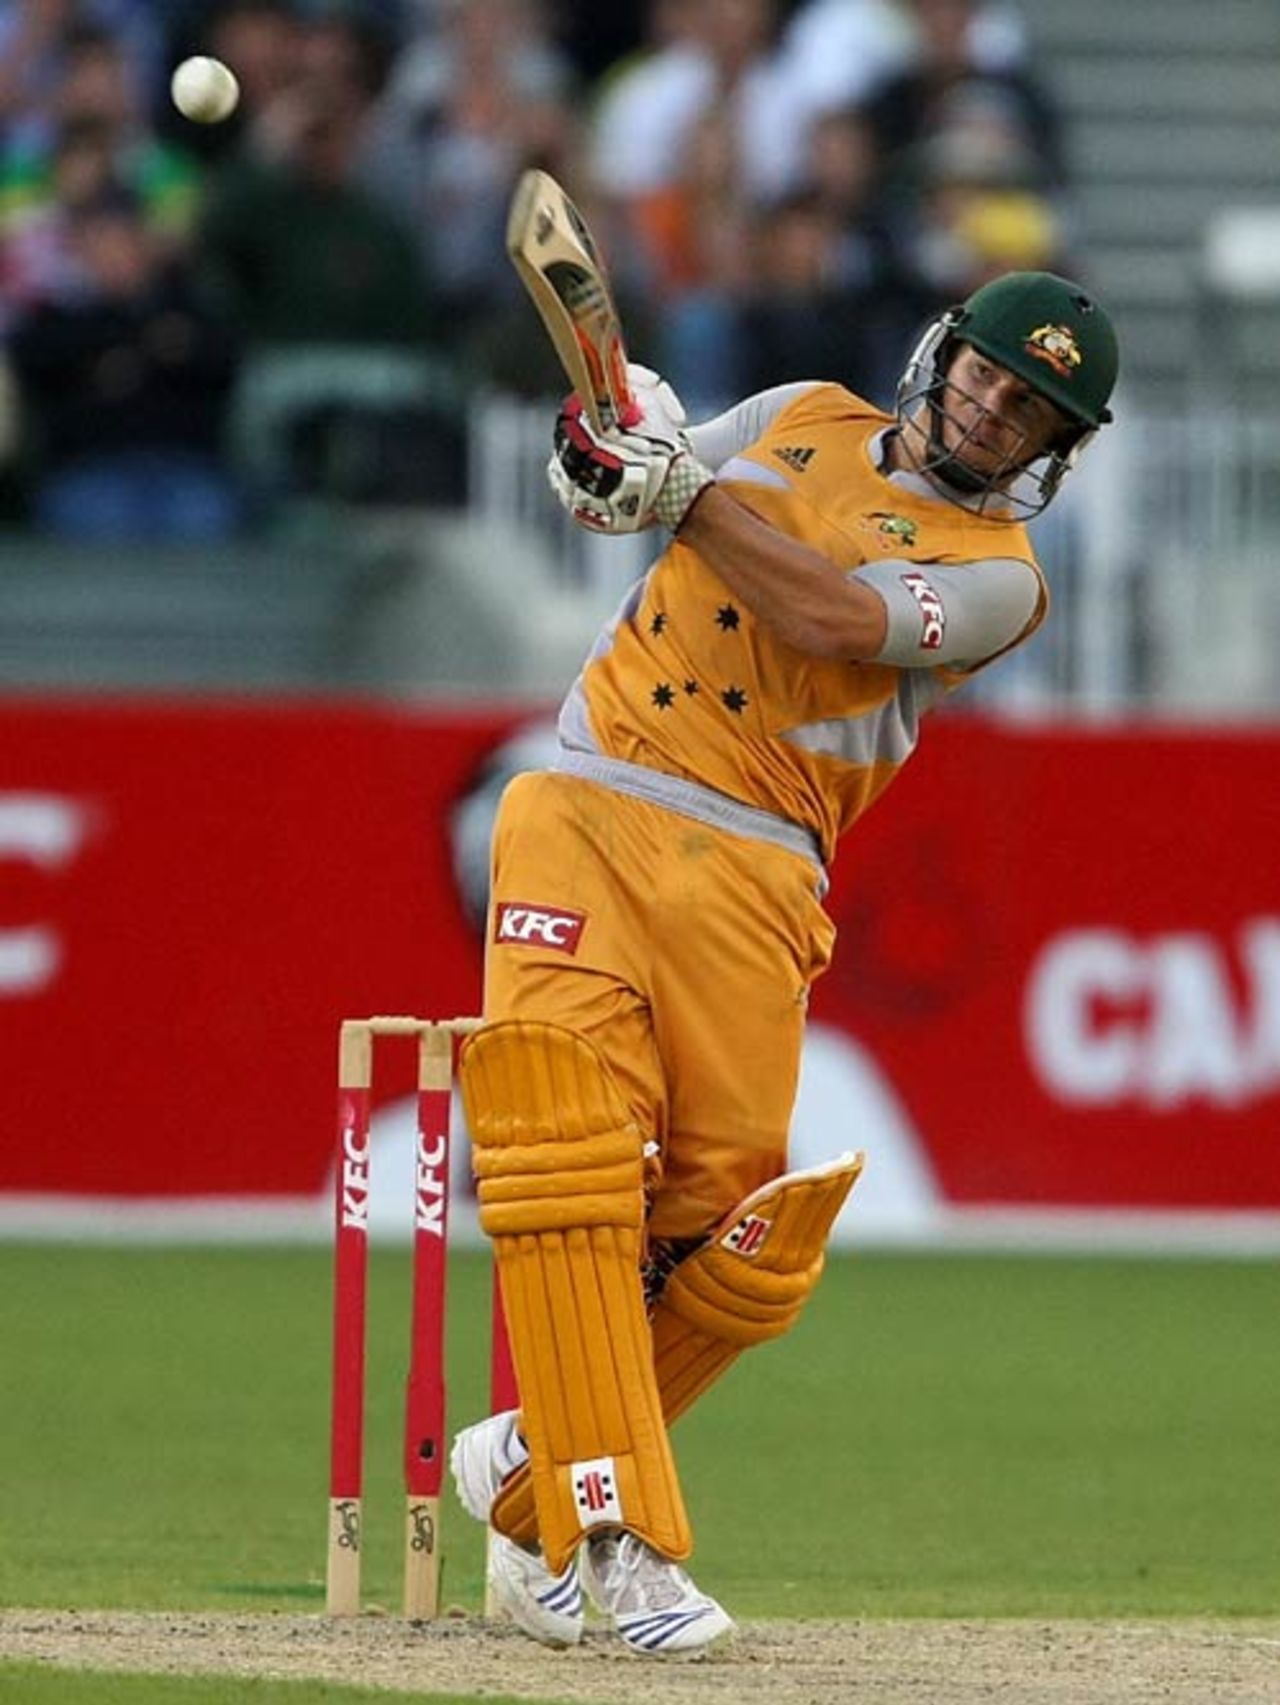 David Warner goes over the top on his way to 89 on debut, Australia v South Africa, 1st Twenty20 international, Melbourne, January 11, 2009